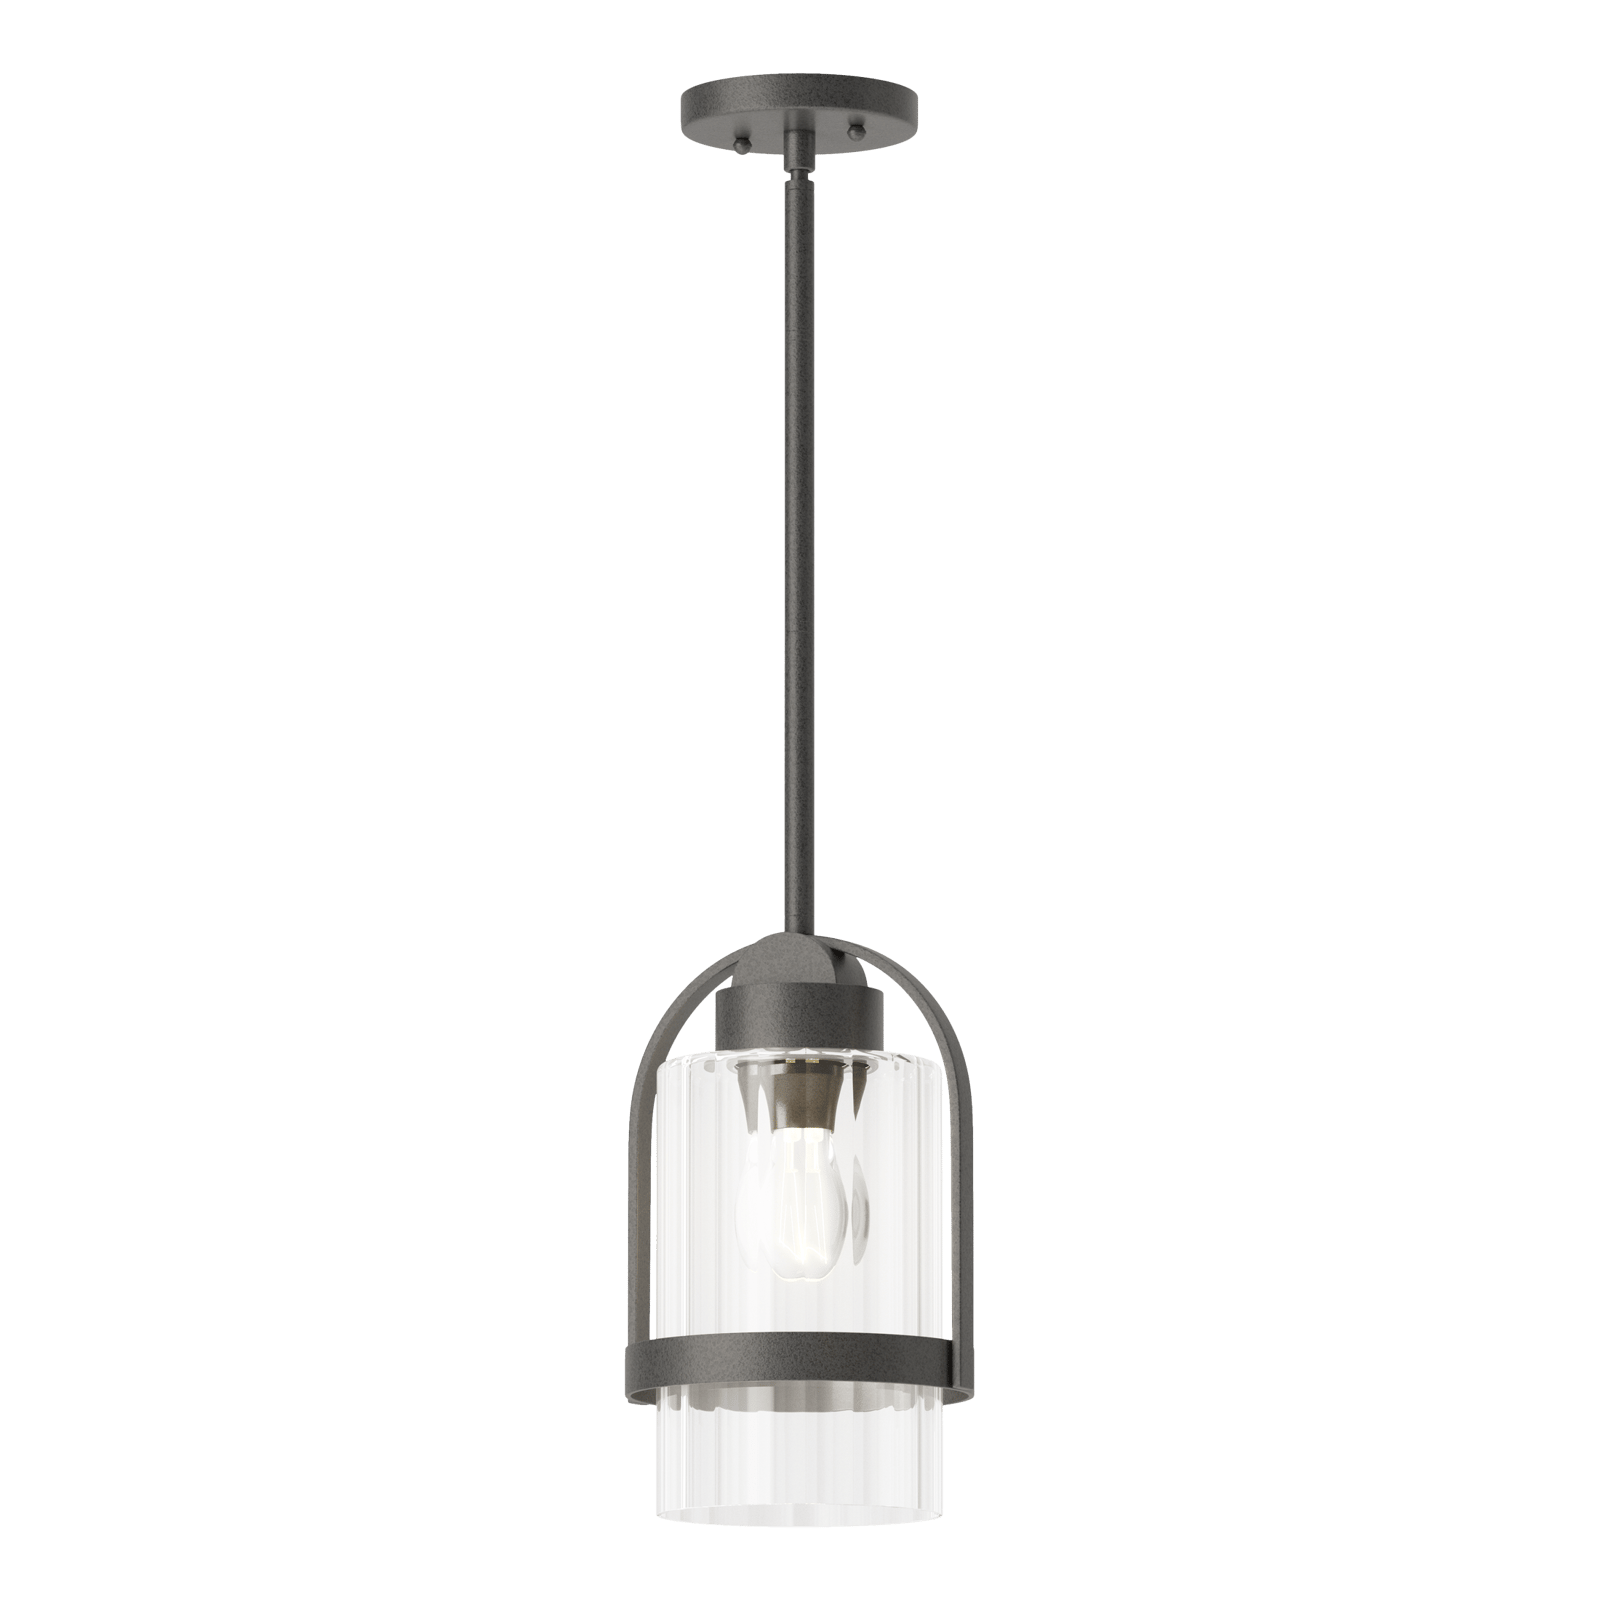 Hubbardton Forge Alcove Outdoor Pendant Outdoor Light Fixture l Hanging Hubbardton Forge Coastal Natural Iron Clear Glass (ZM) 